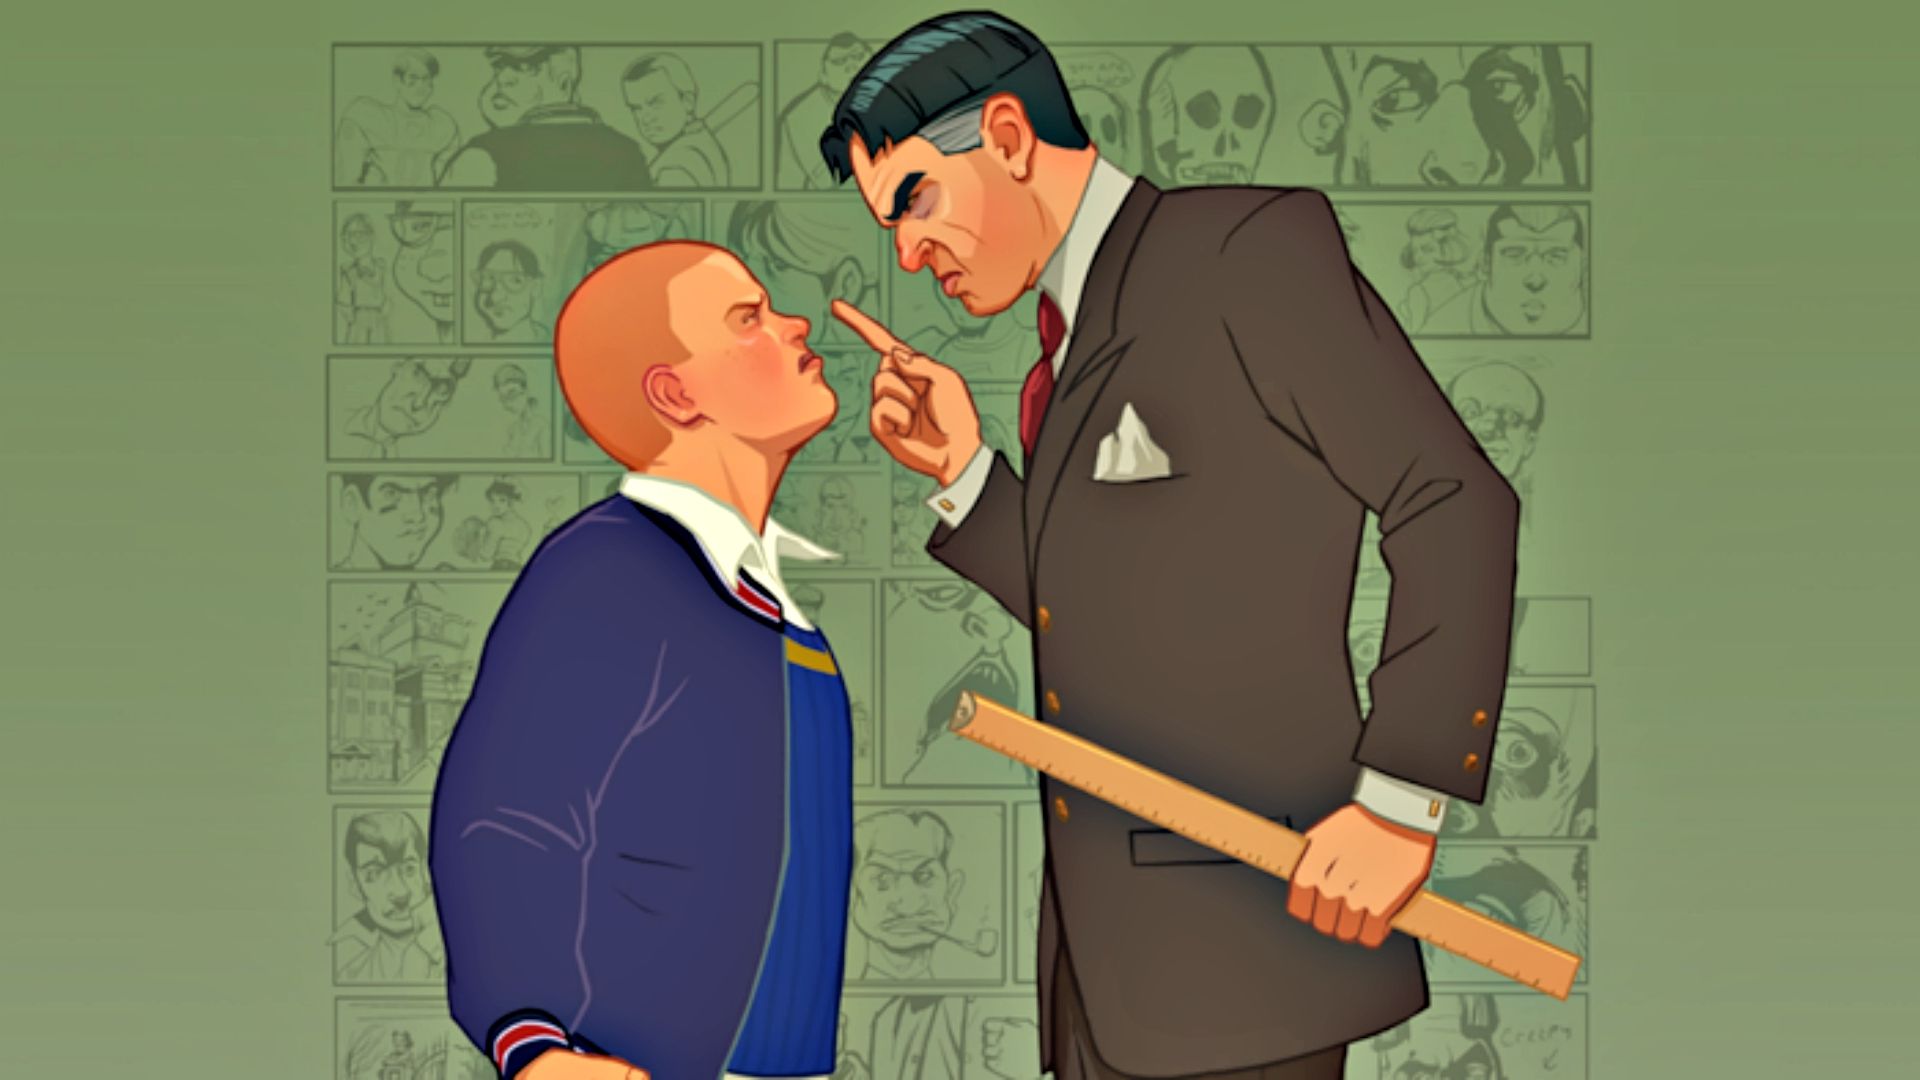 Bully Wallpaper Free Bully Background